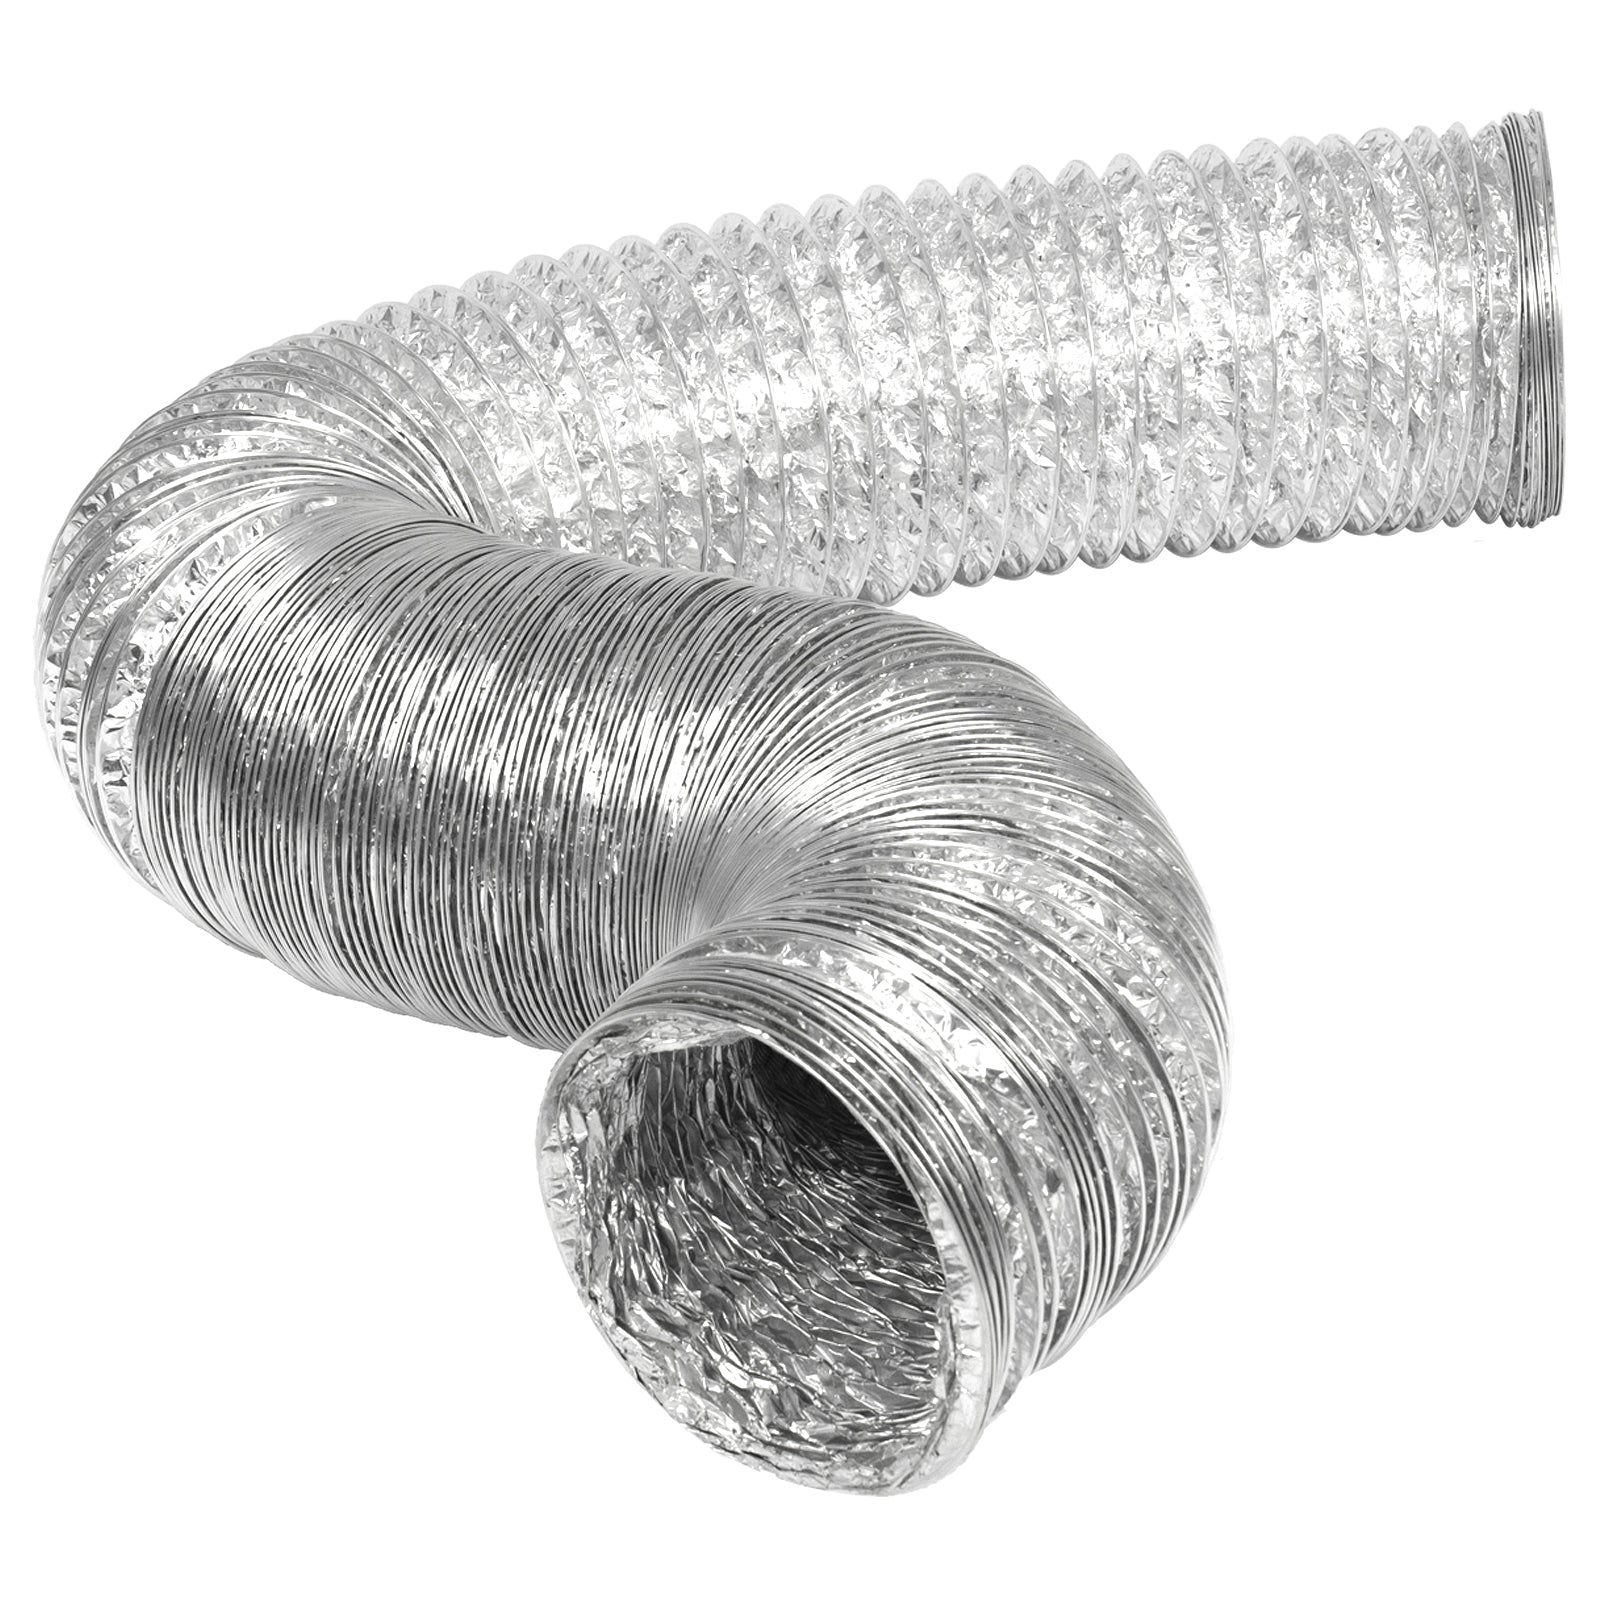 Abestorm Dehumidifier Aluminum Flexible Foil Outlet Duct for Guardian SNS55, SN90 and SNS90, 6 inches in diameter and 11.5 feet long (6")